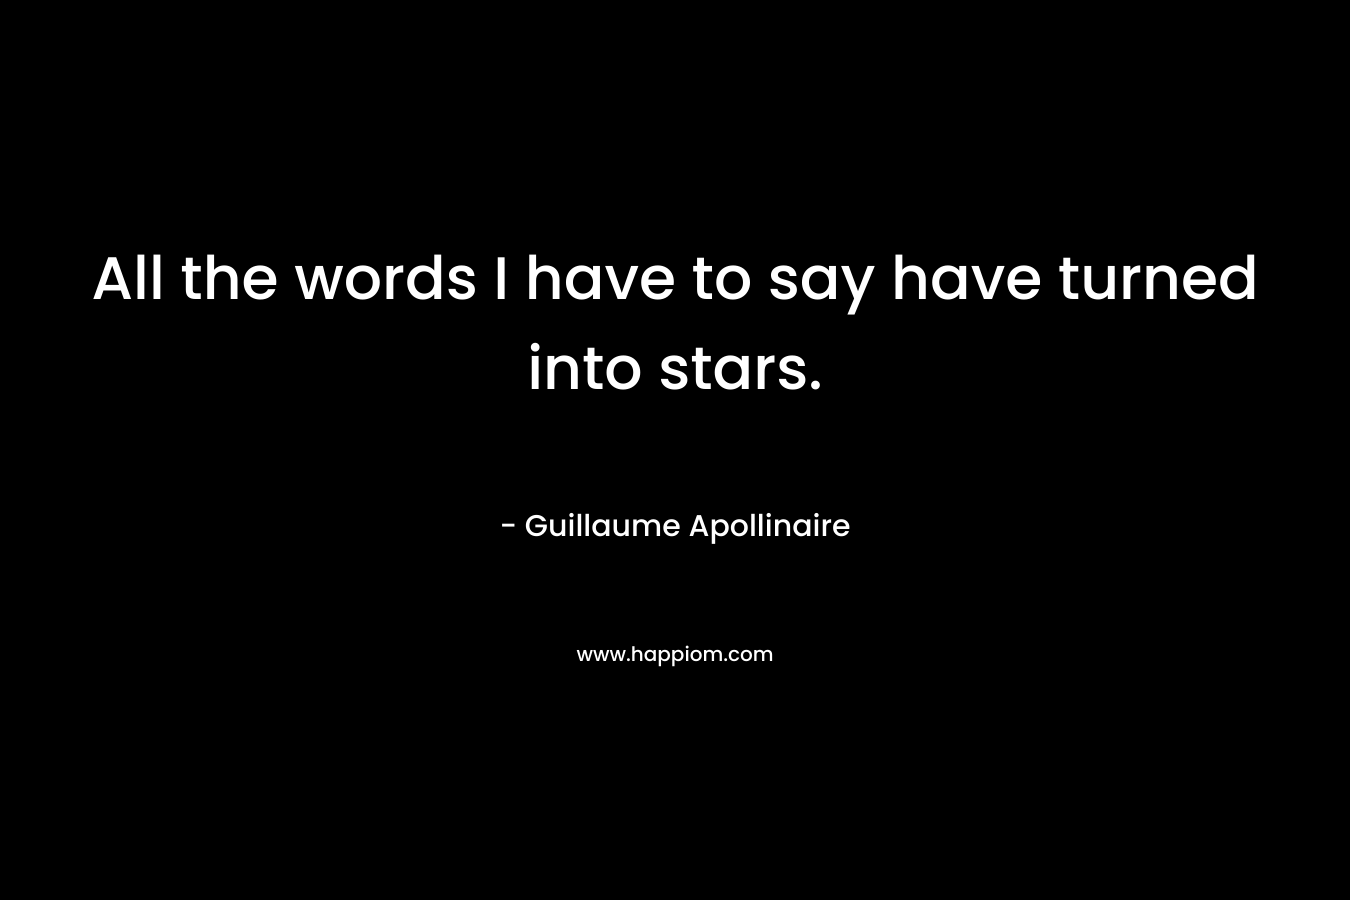 All the words I have to say have turned into stars. – Guillaume Apollinaire